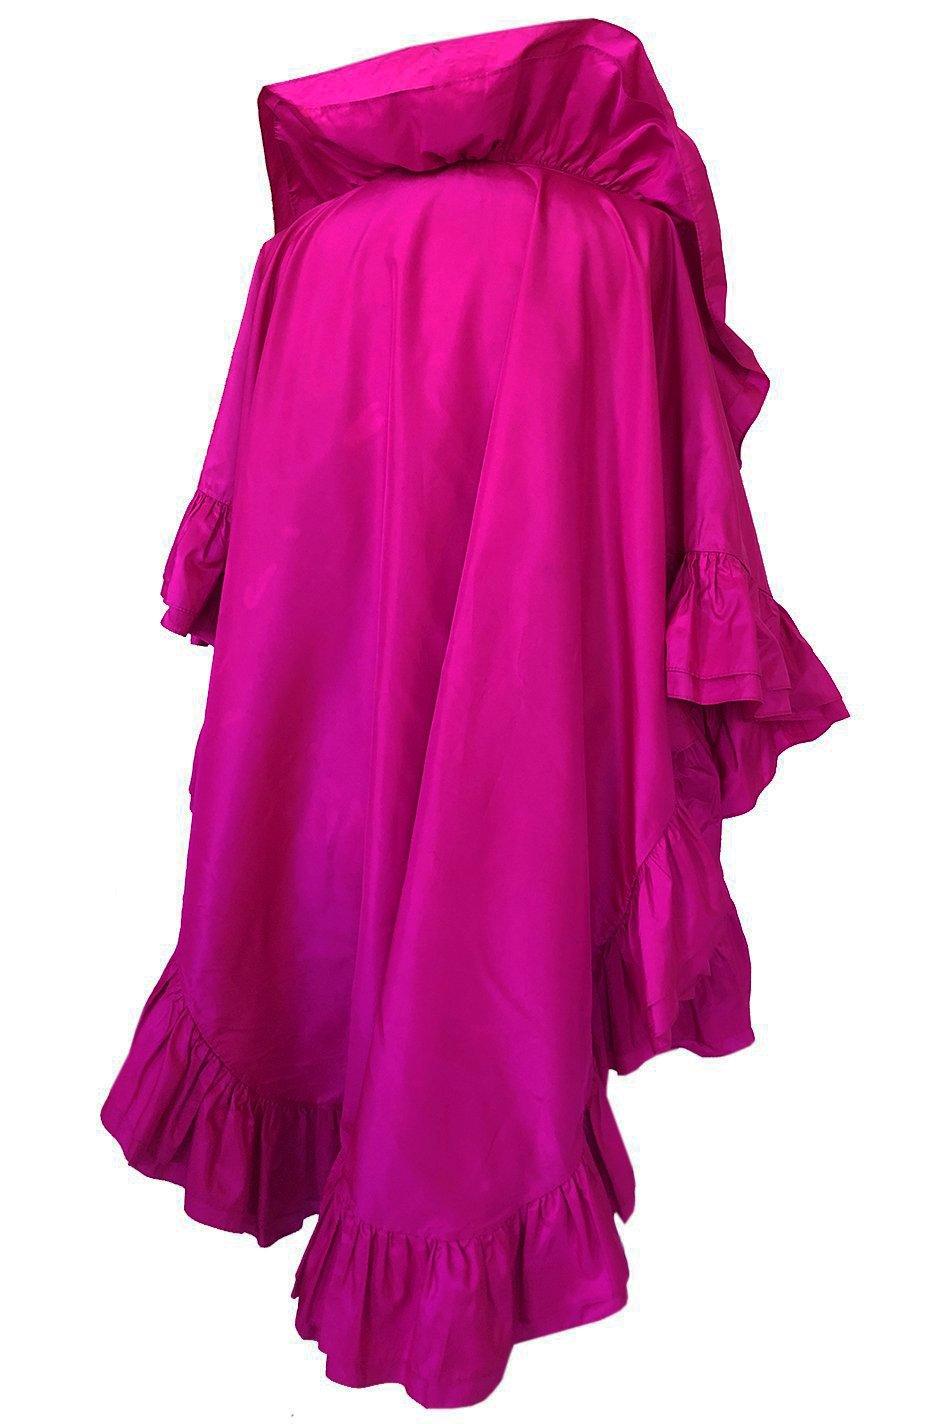 The vivid pink of this silk ruffled Dior evening piece is absolutely exquisite. Even though it a a bright pow of color it will still suit most skin tones and be a dramatic pop of color to any look. It is made from a high end silk taffeta. The design